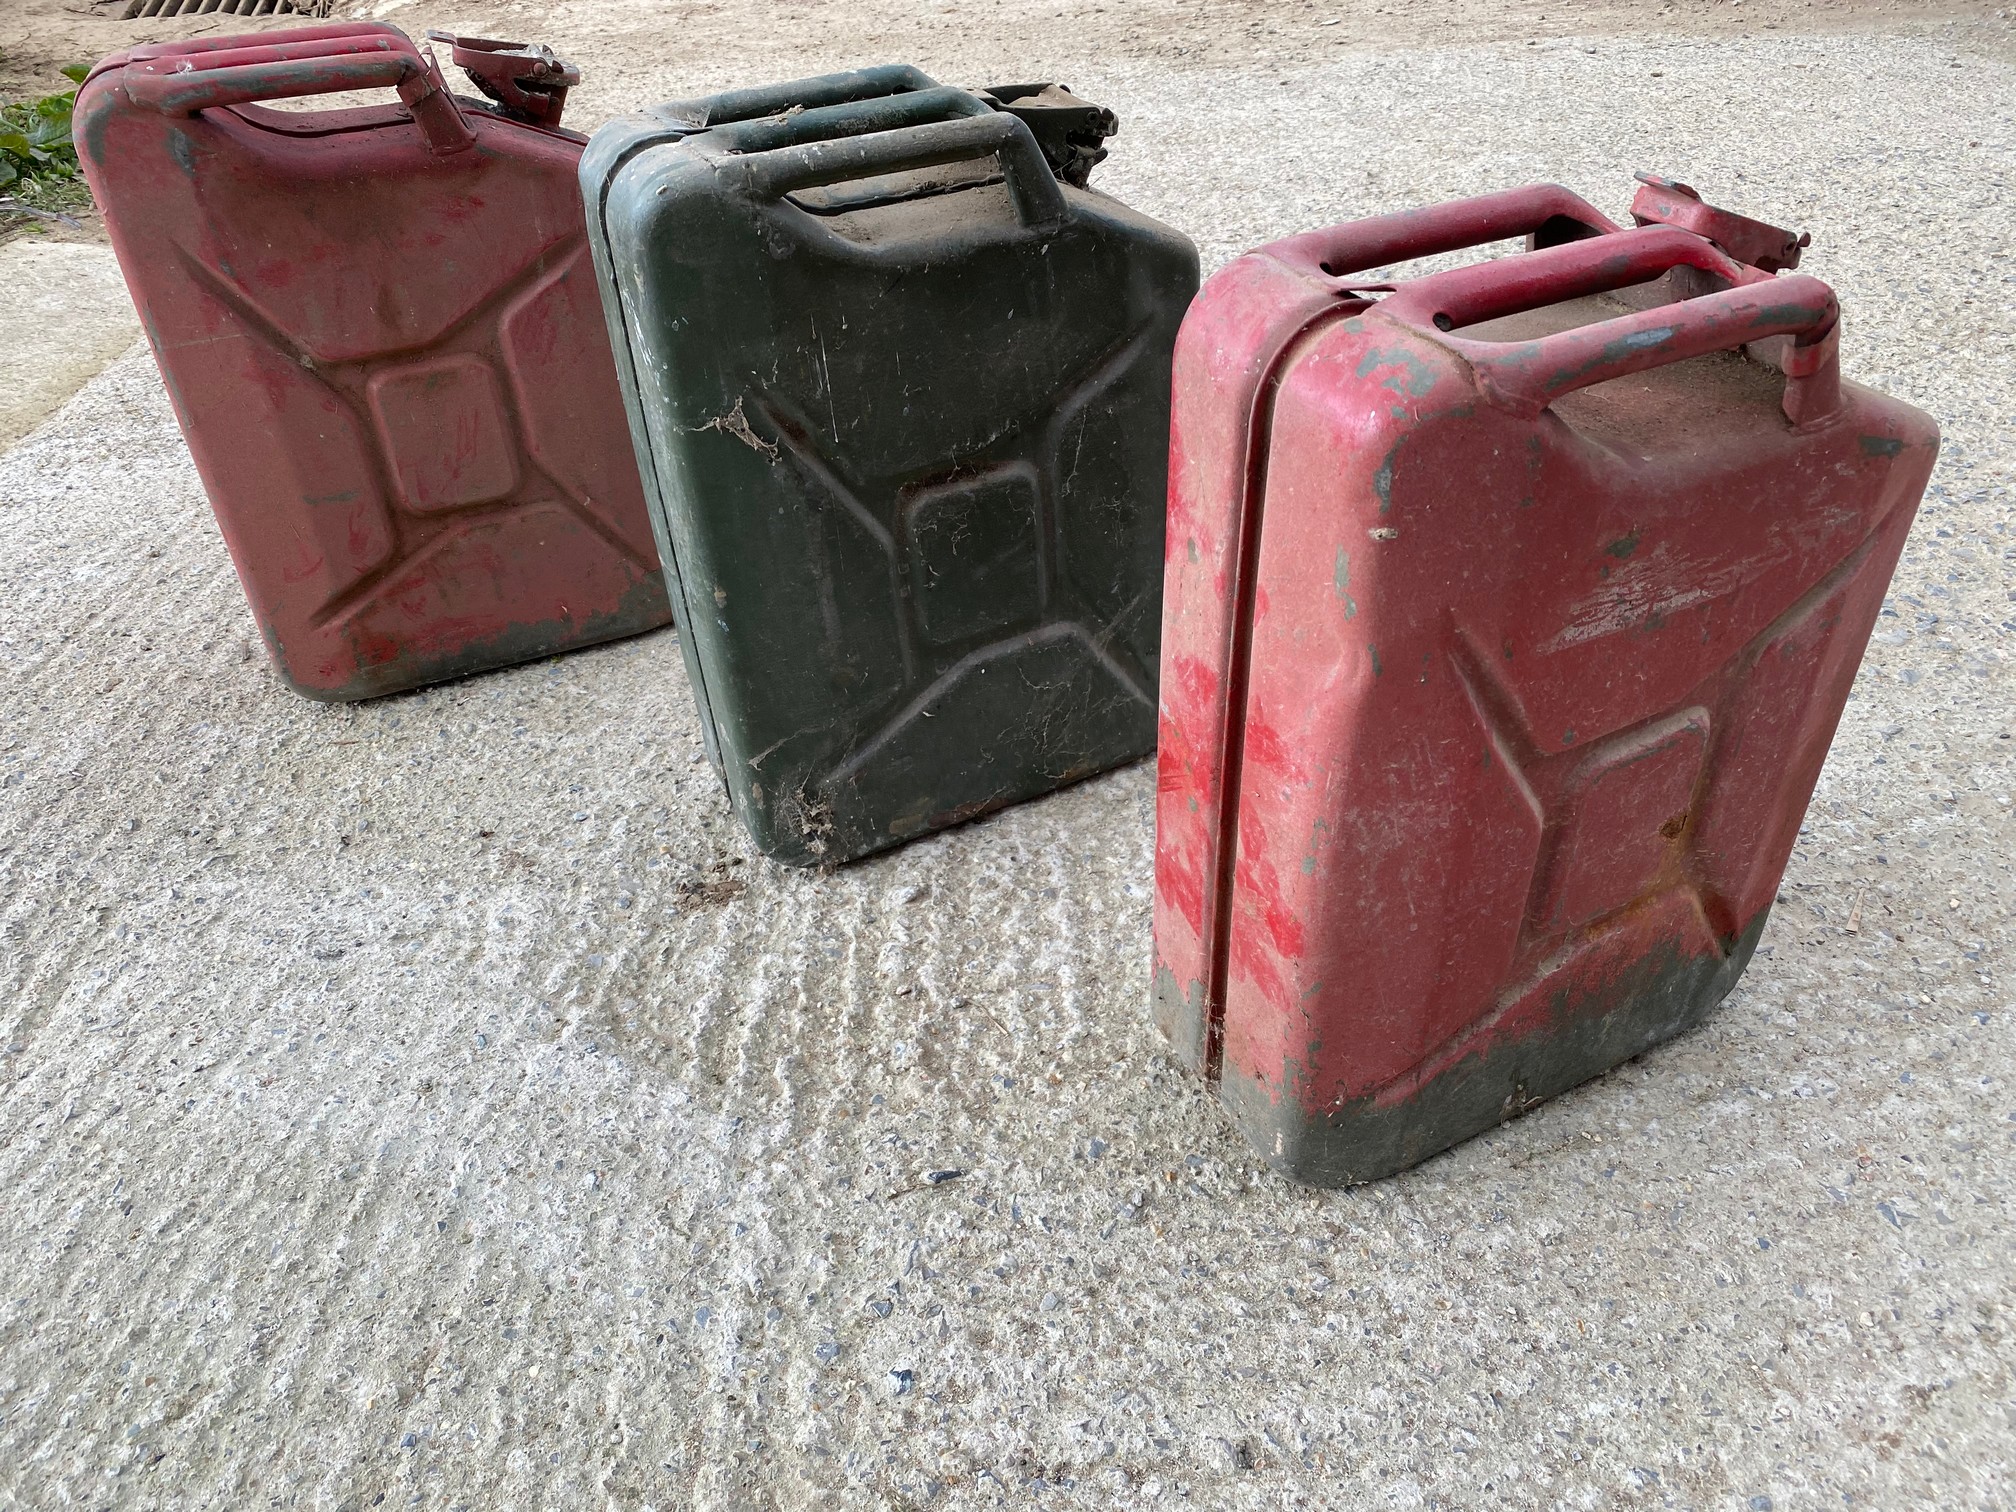 Three jerry cans.